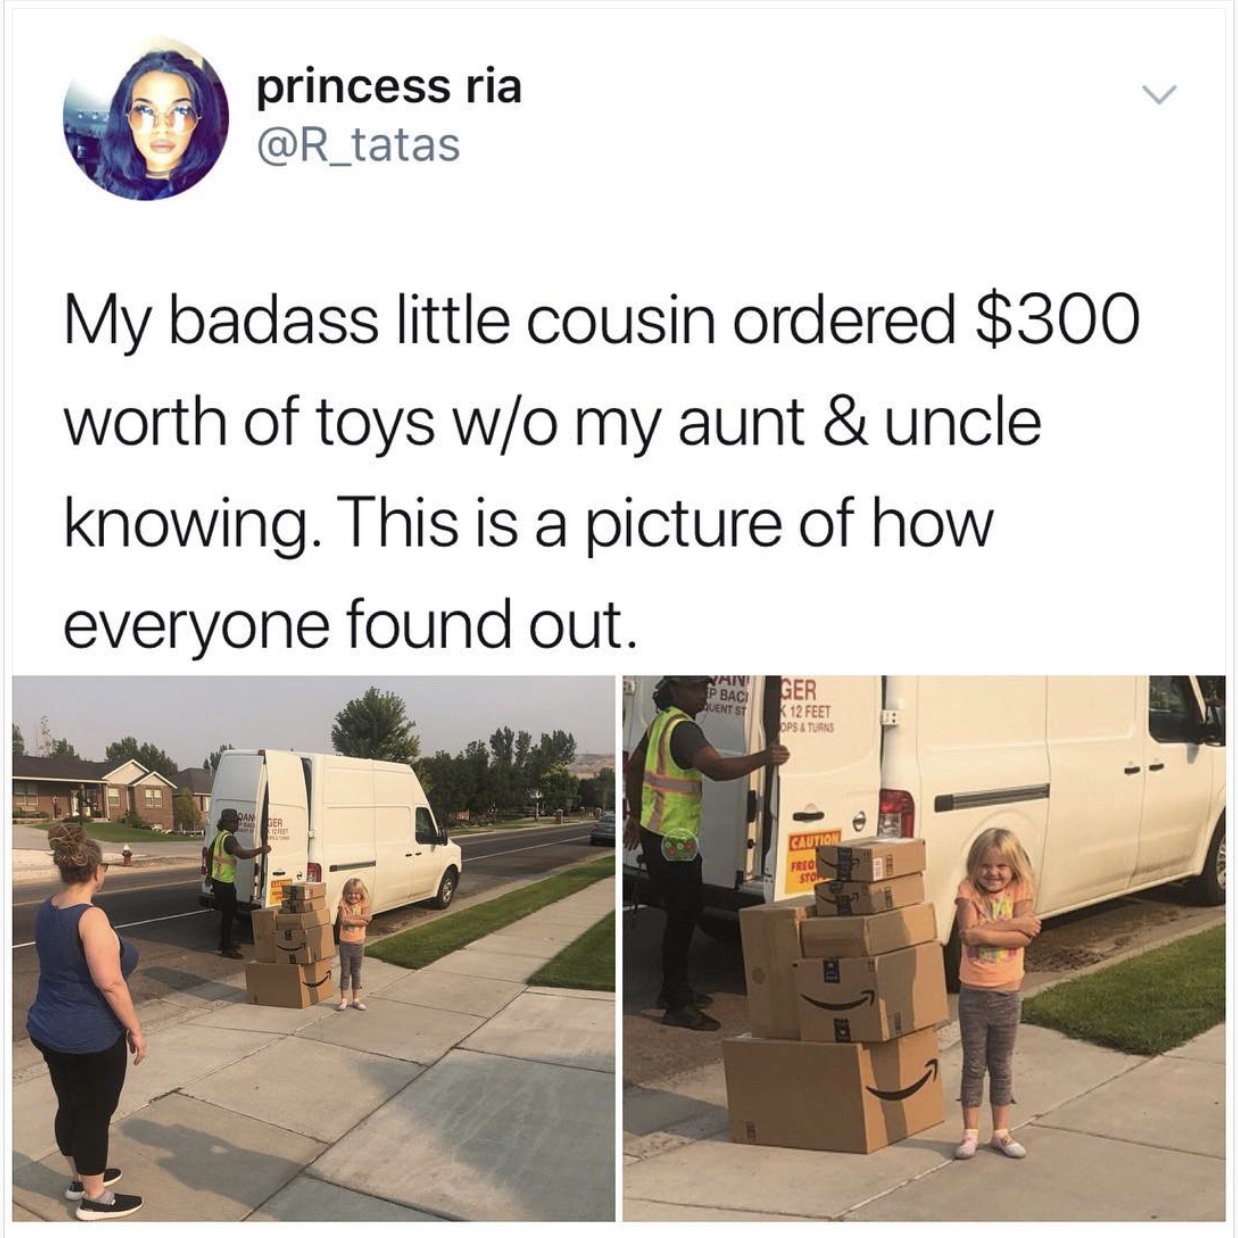 little cousin meme - princess ria My badass little cousin ordered $300 worth of toys wo my aunt & uncle knowing. This is a picture of how everyone found out